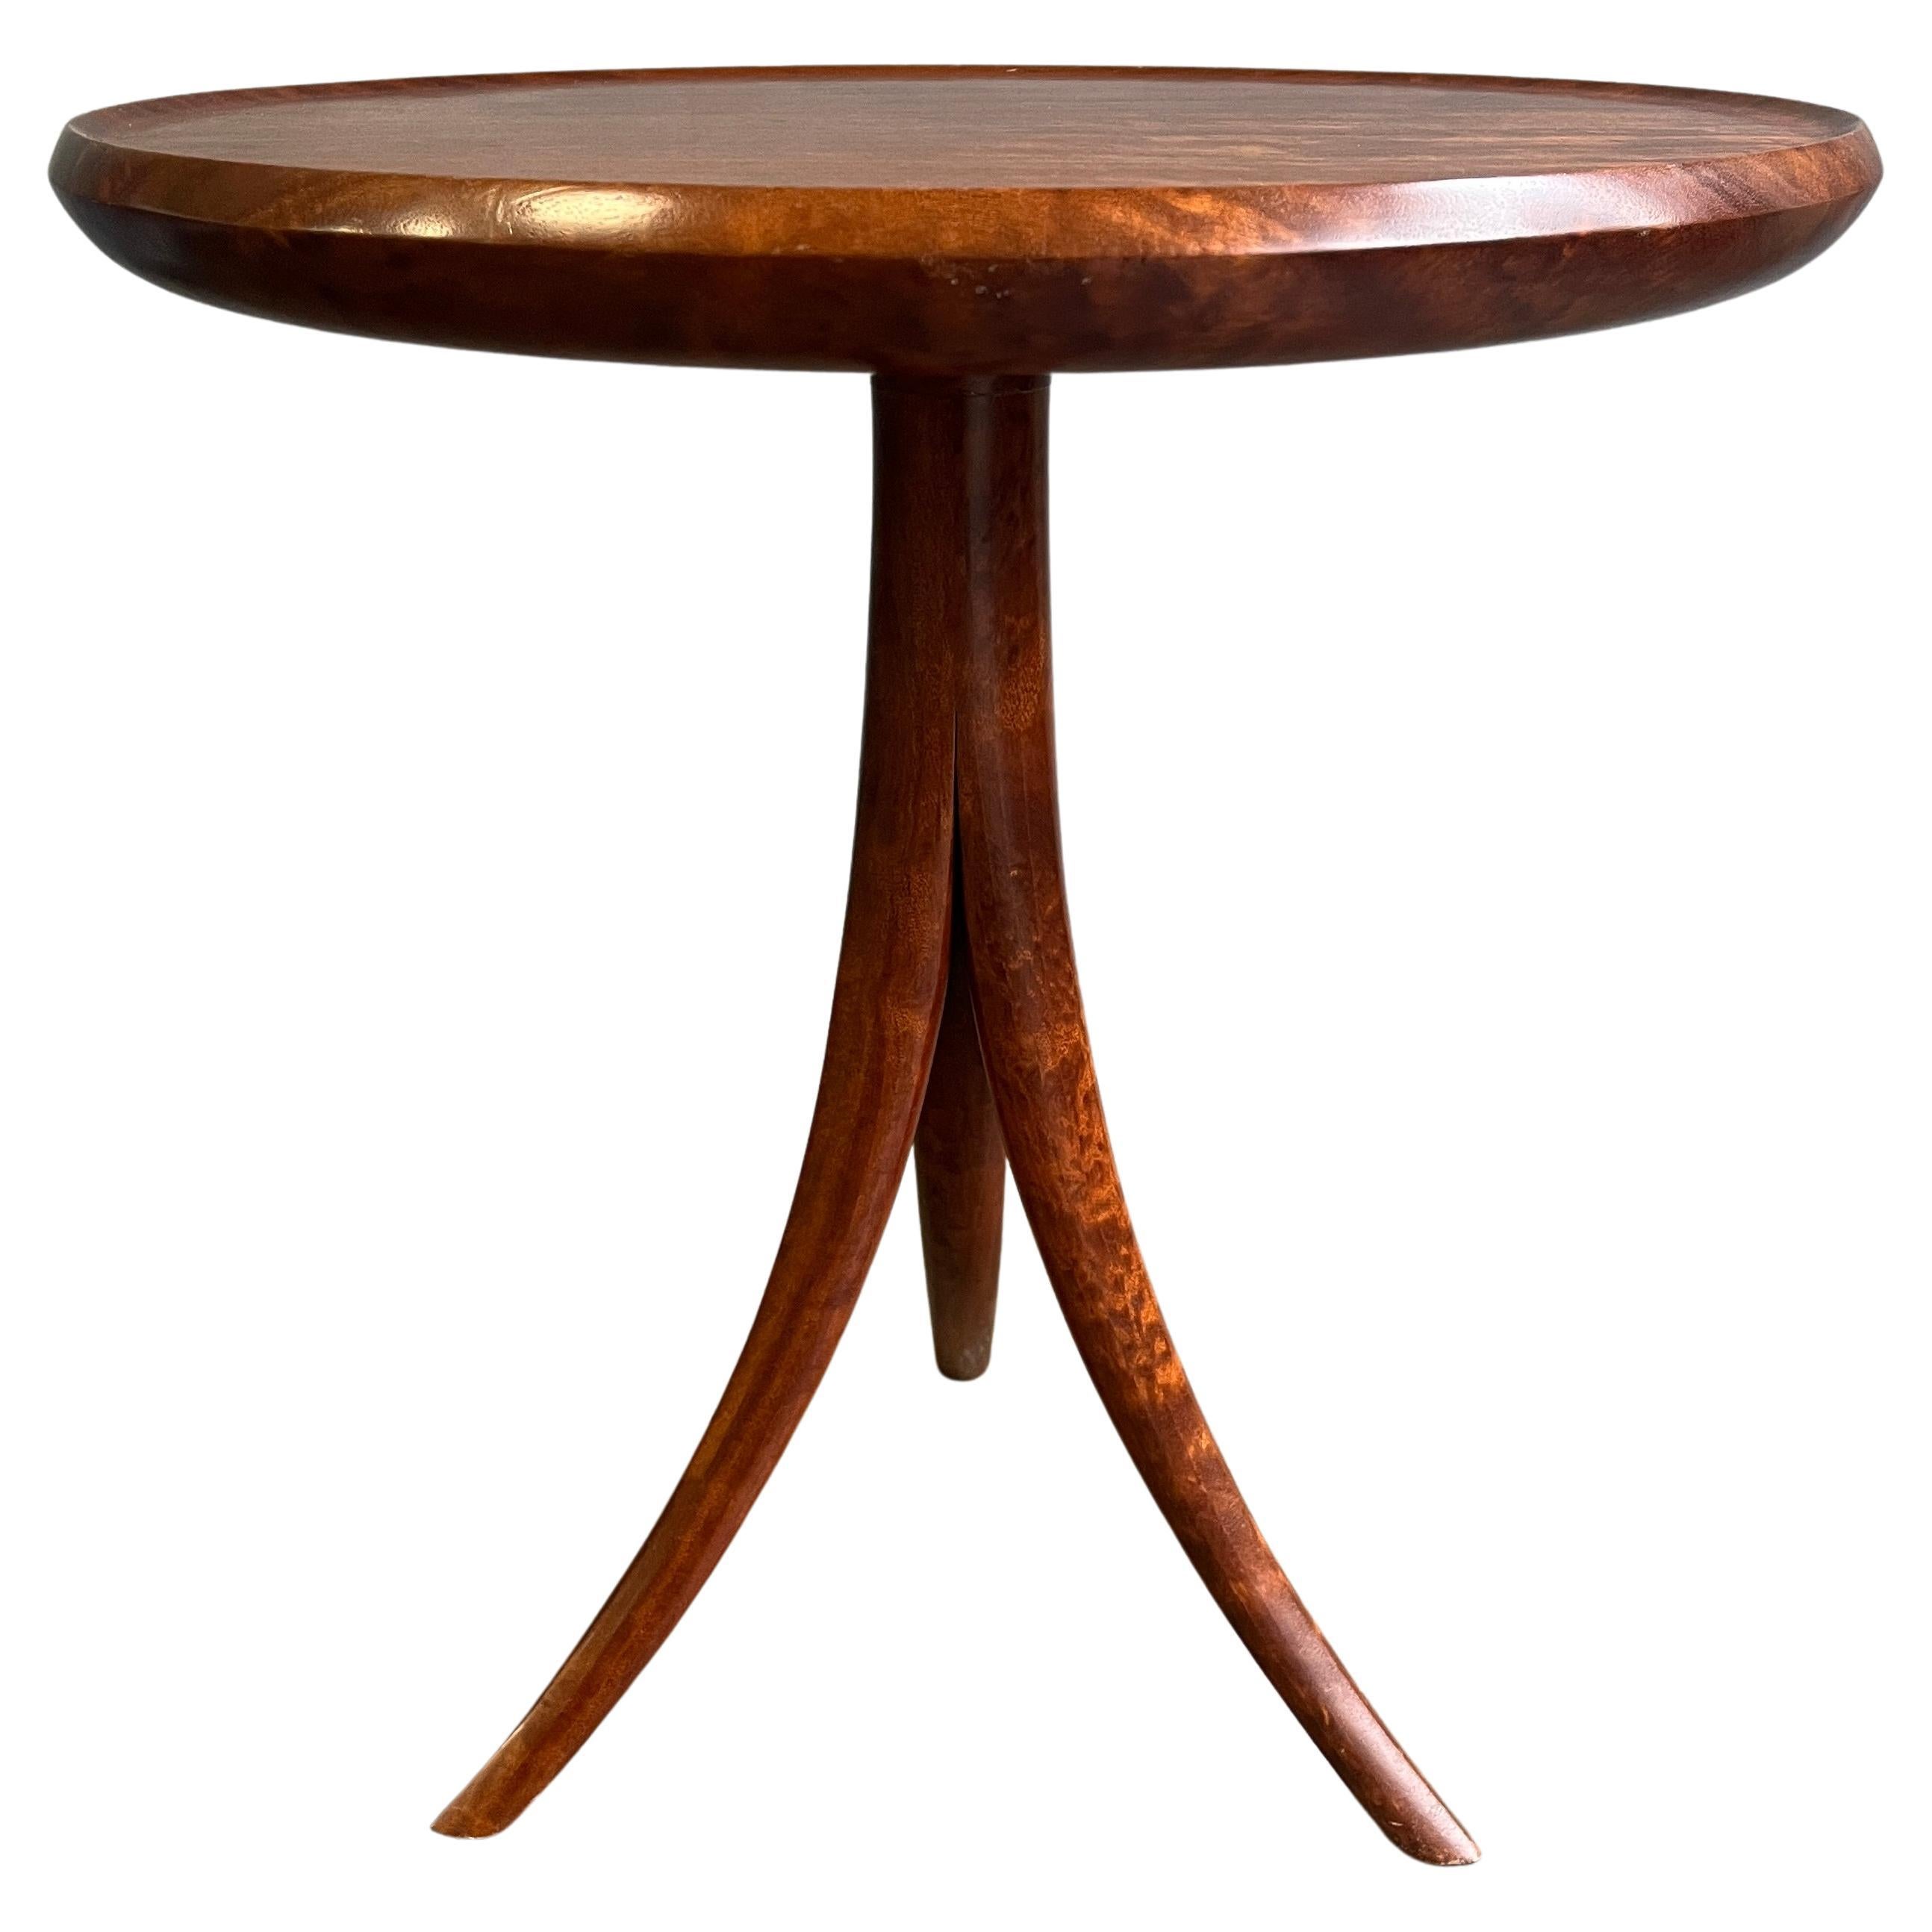 Exceptional midcentury styled tripod table with incredible figuring, likely a tropical hardwood, featuring circular dished top raised on a stylized one-piece tripod base, monogrammed and inscribed on the underside.